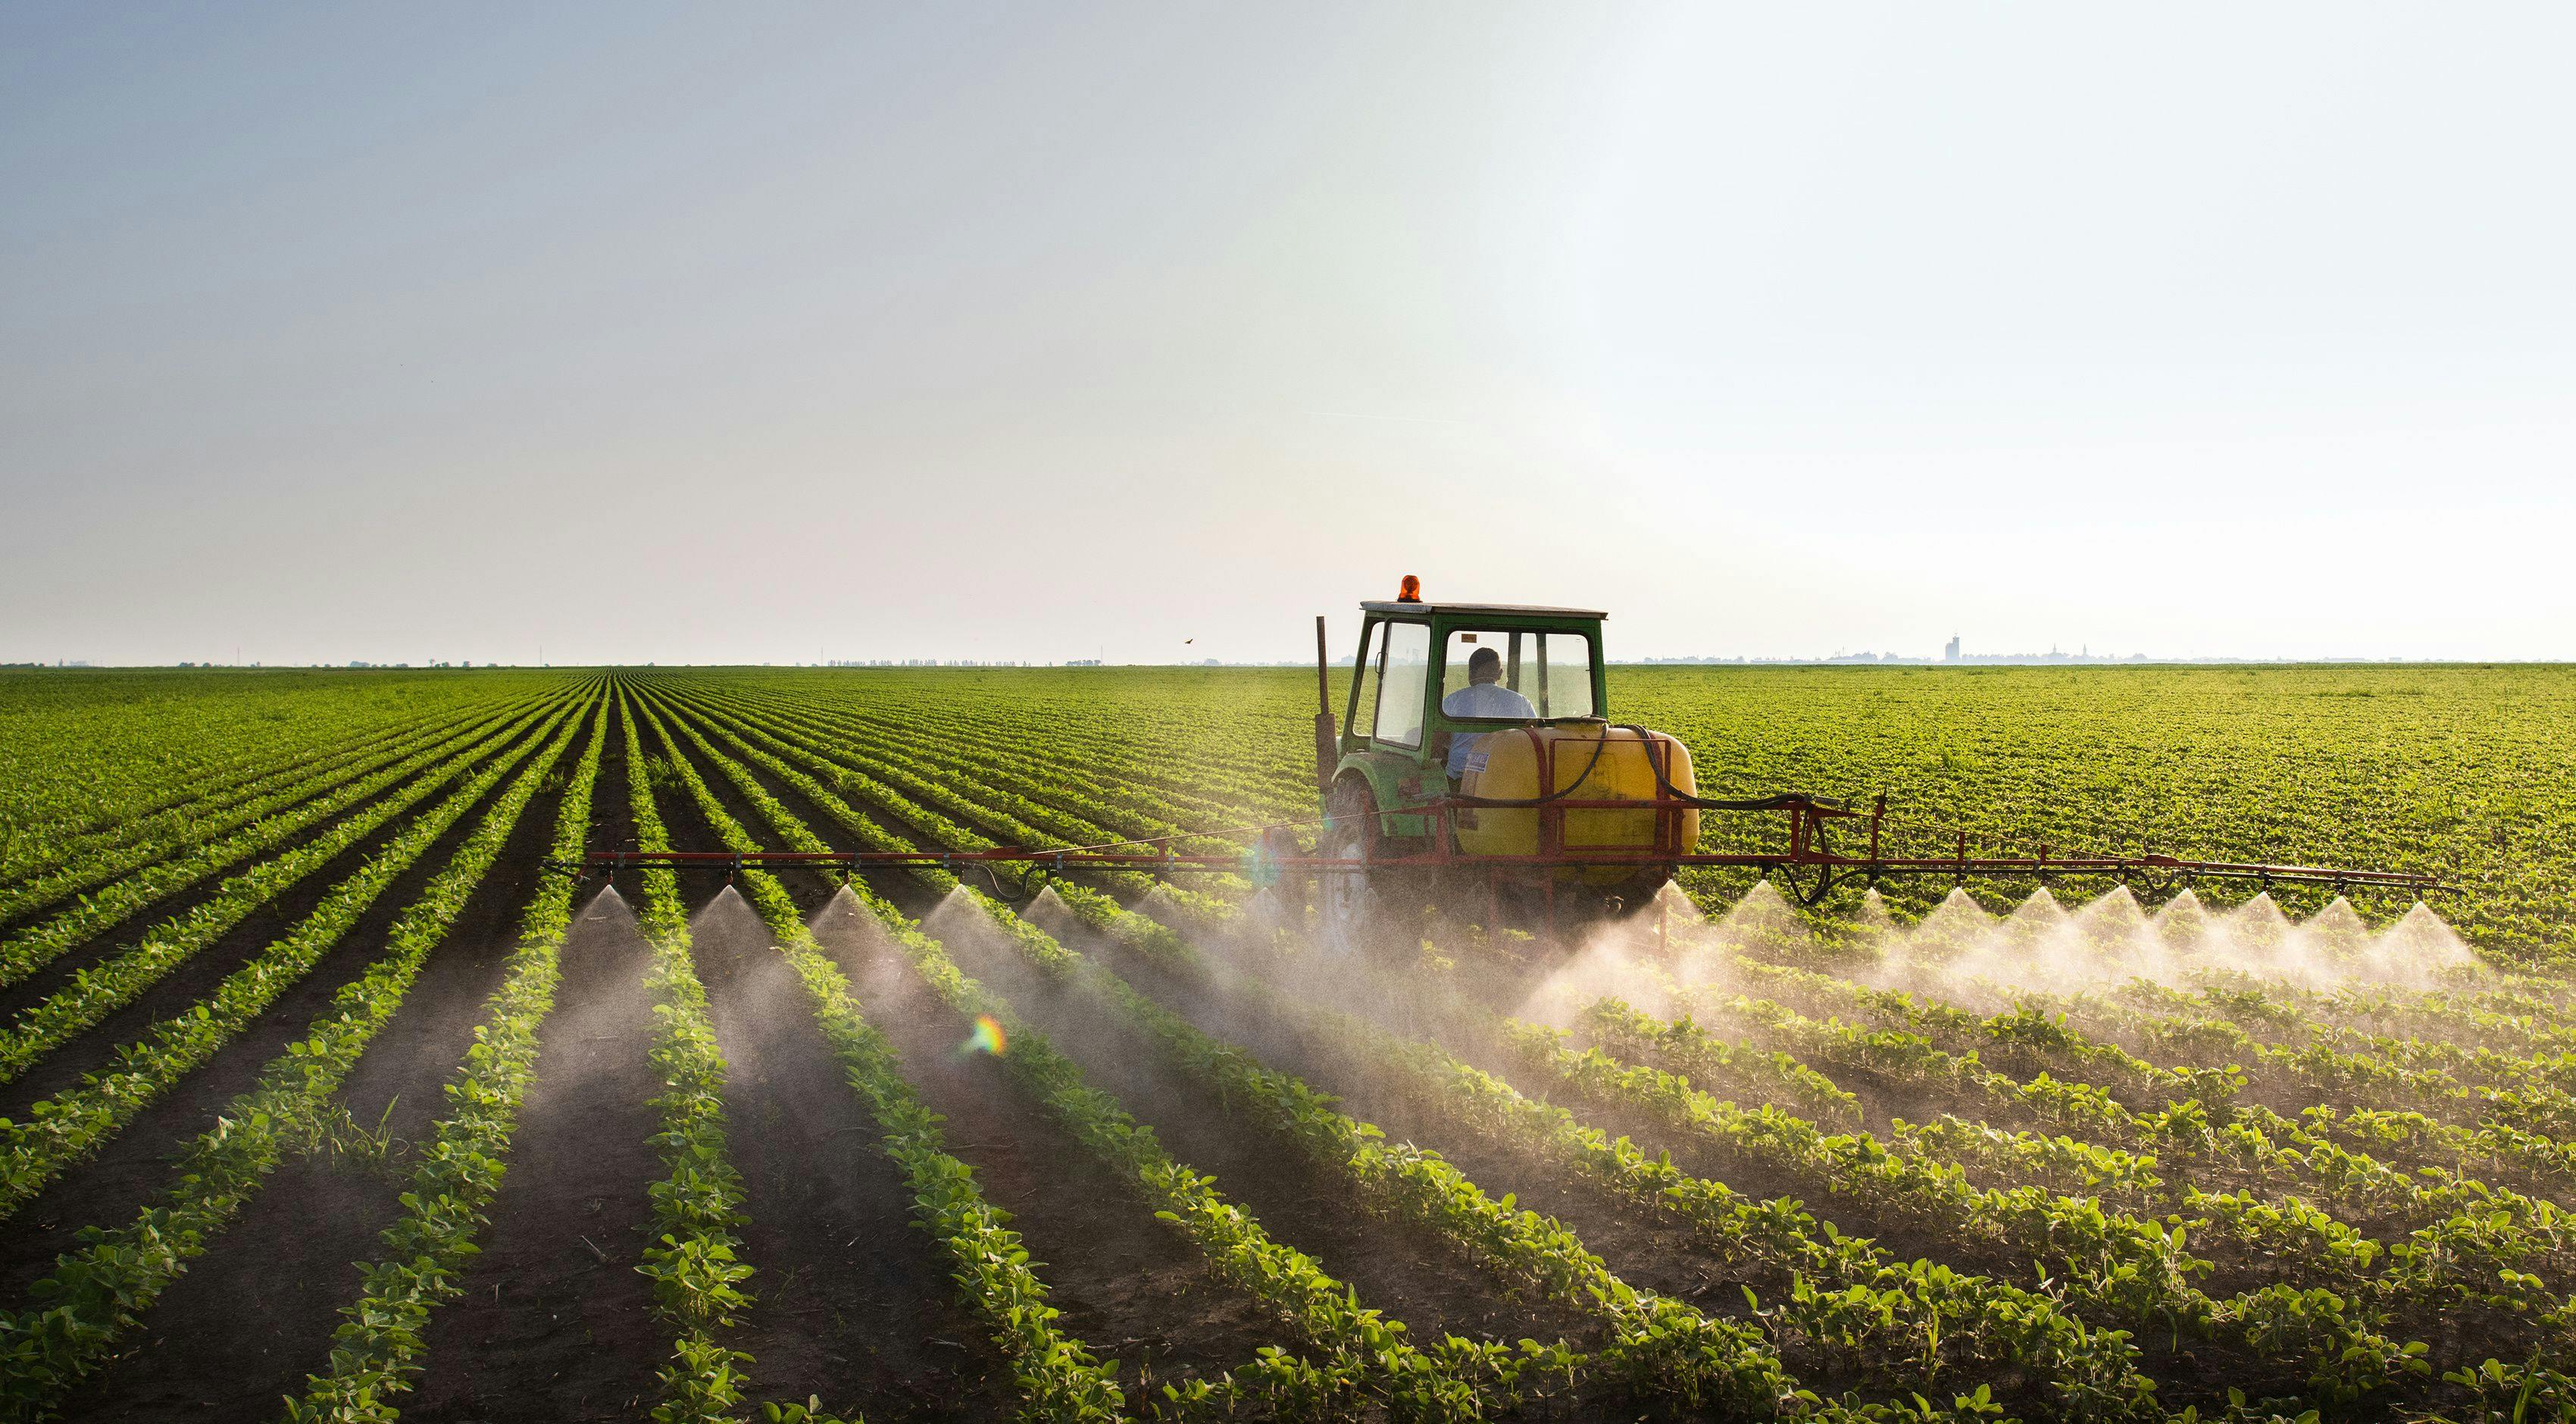 Tractor spraying soybean field | Image Credit: © Dusan Kostic - stock.adobe.com.